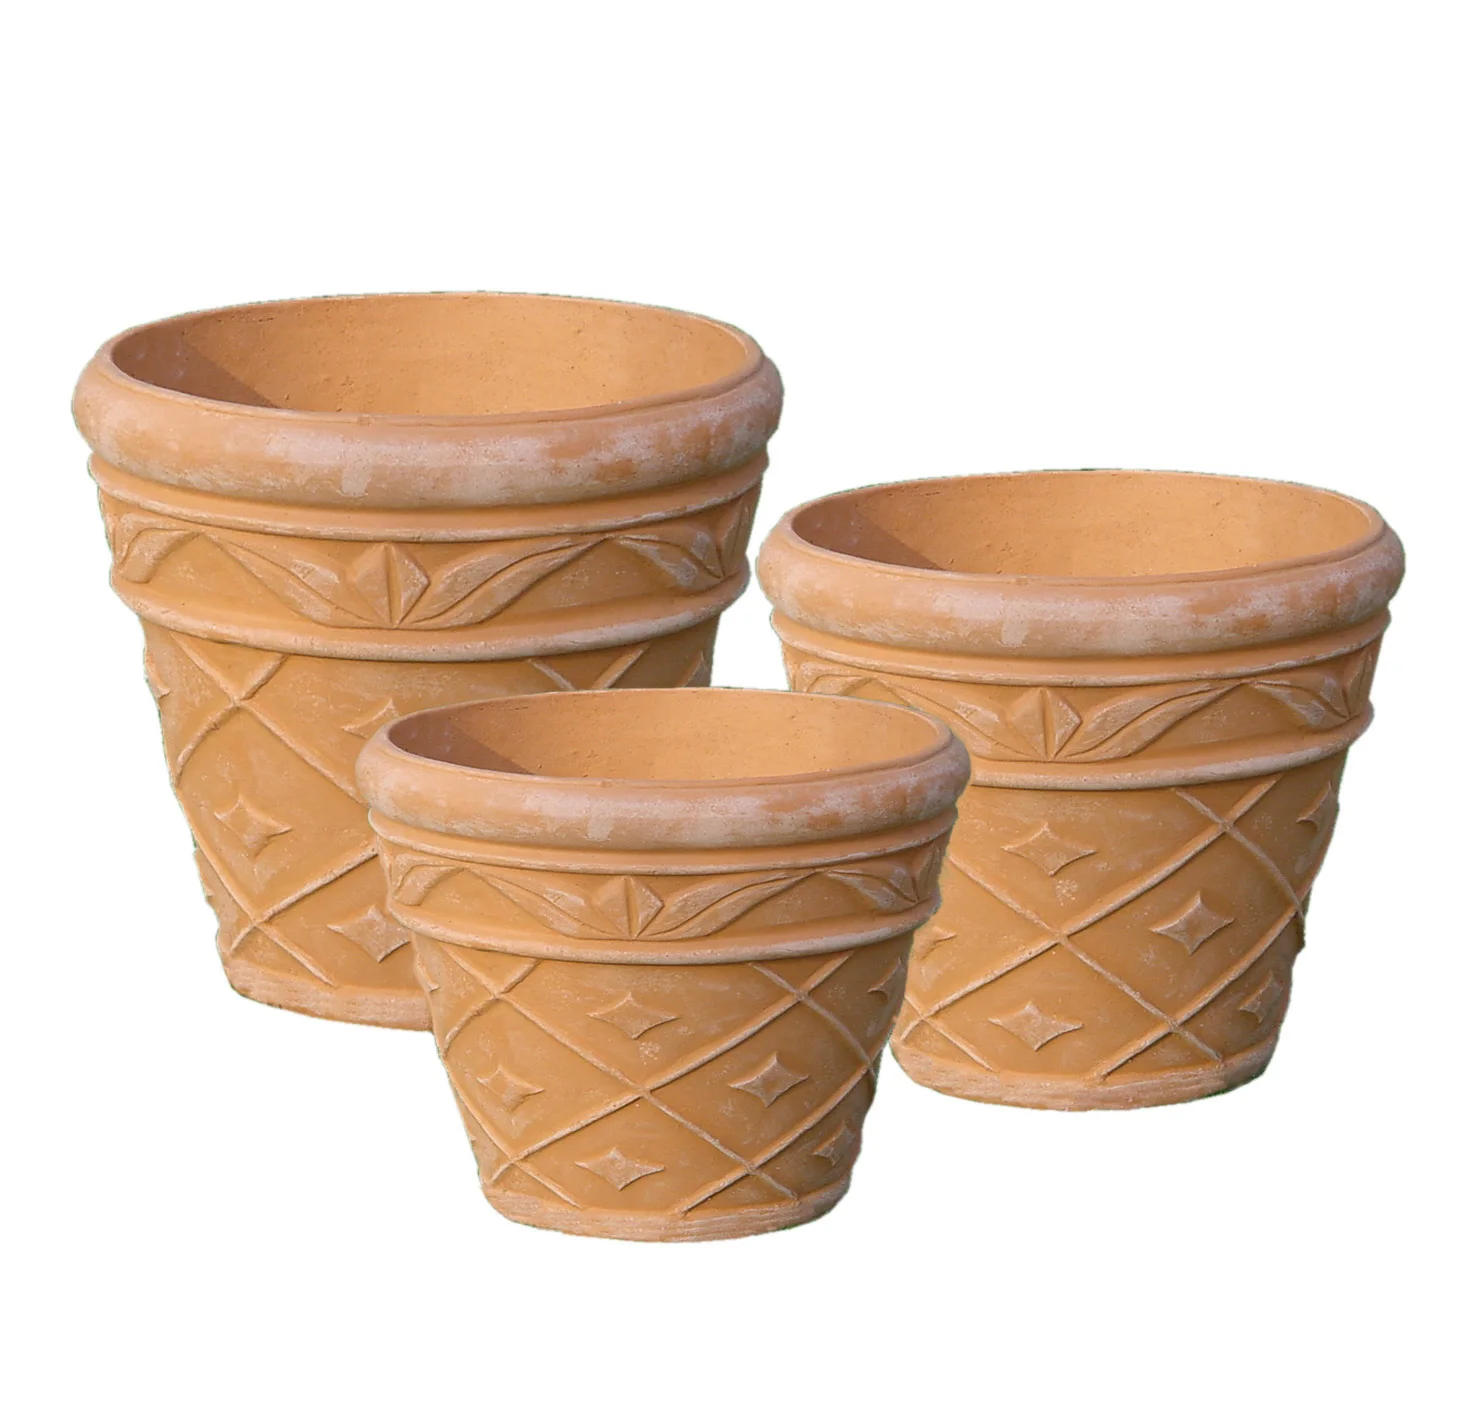 European-Style Terracotta Ceramic Clay Pots Floor-Based Planter for Outdoor Flower Planting in Home and Nursery Garden